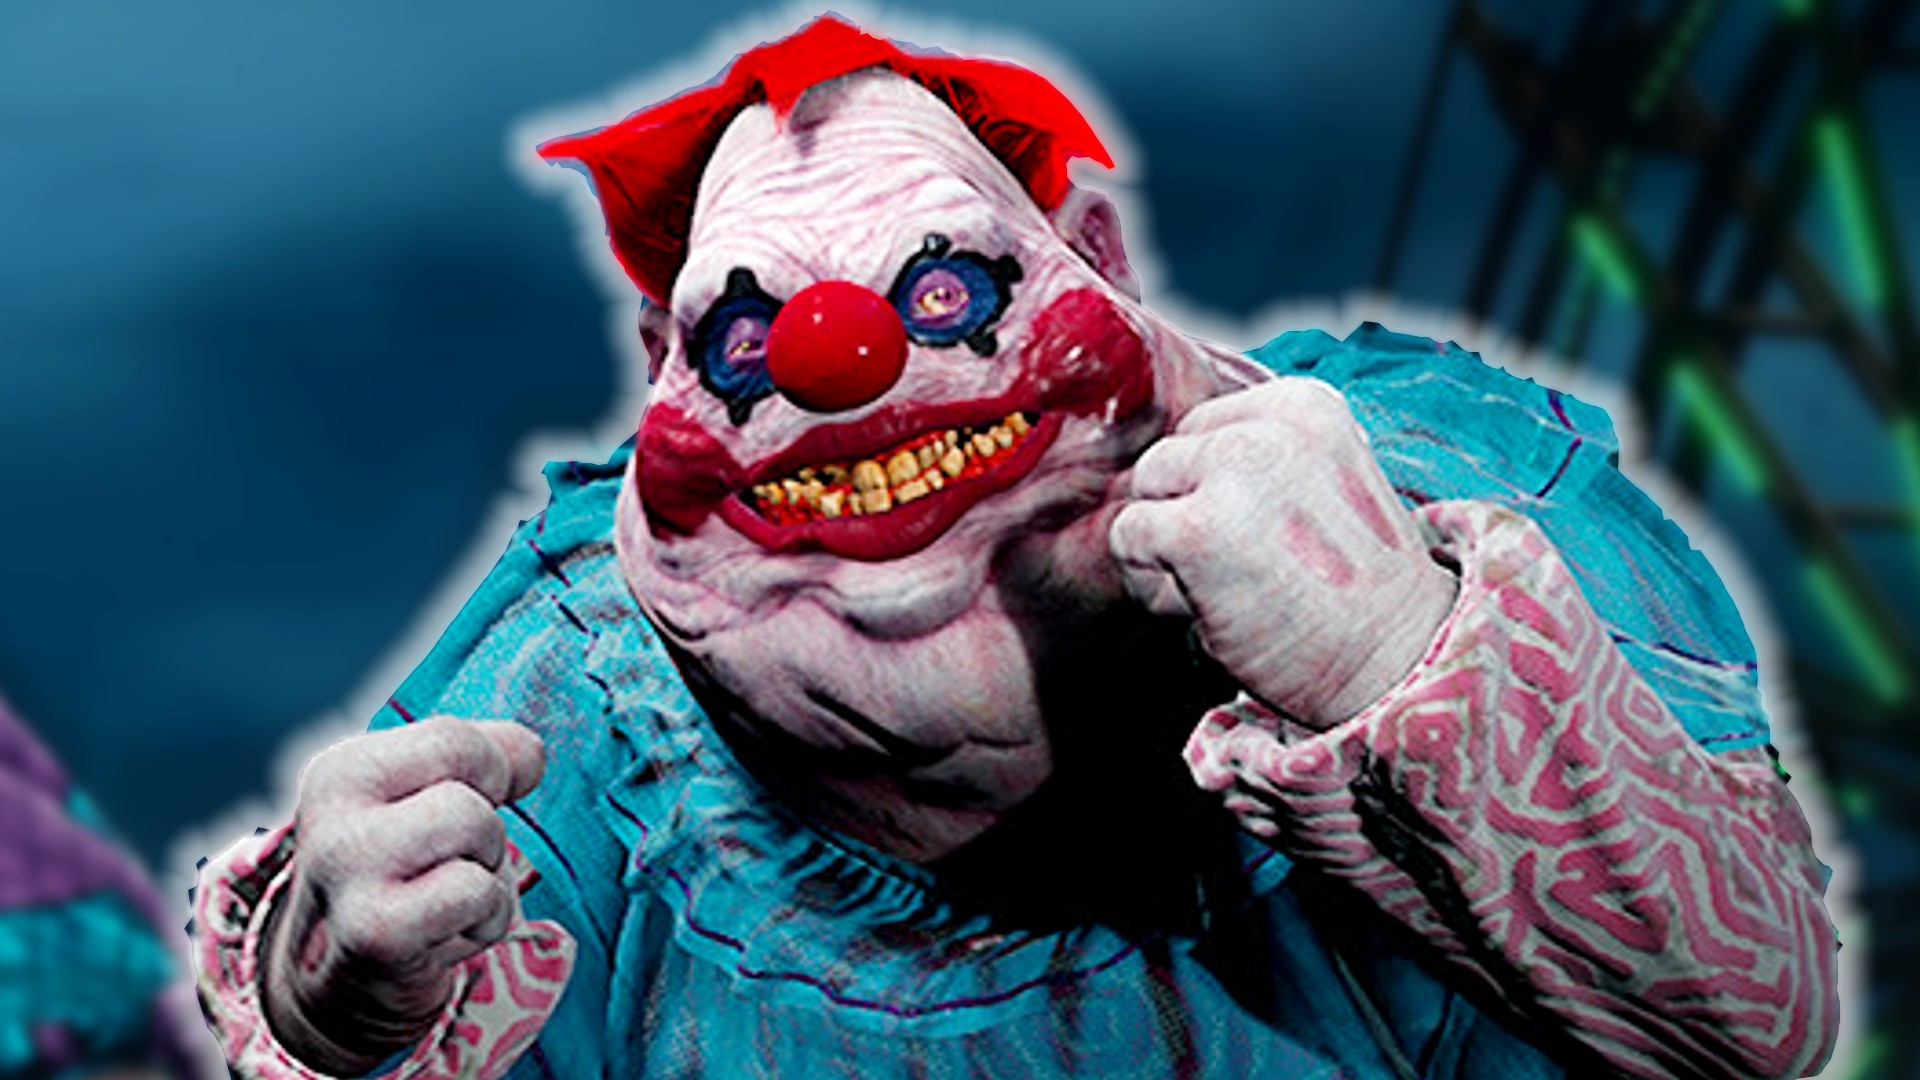 Killer Klowns from Outer Space release date, news, and more